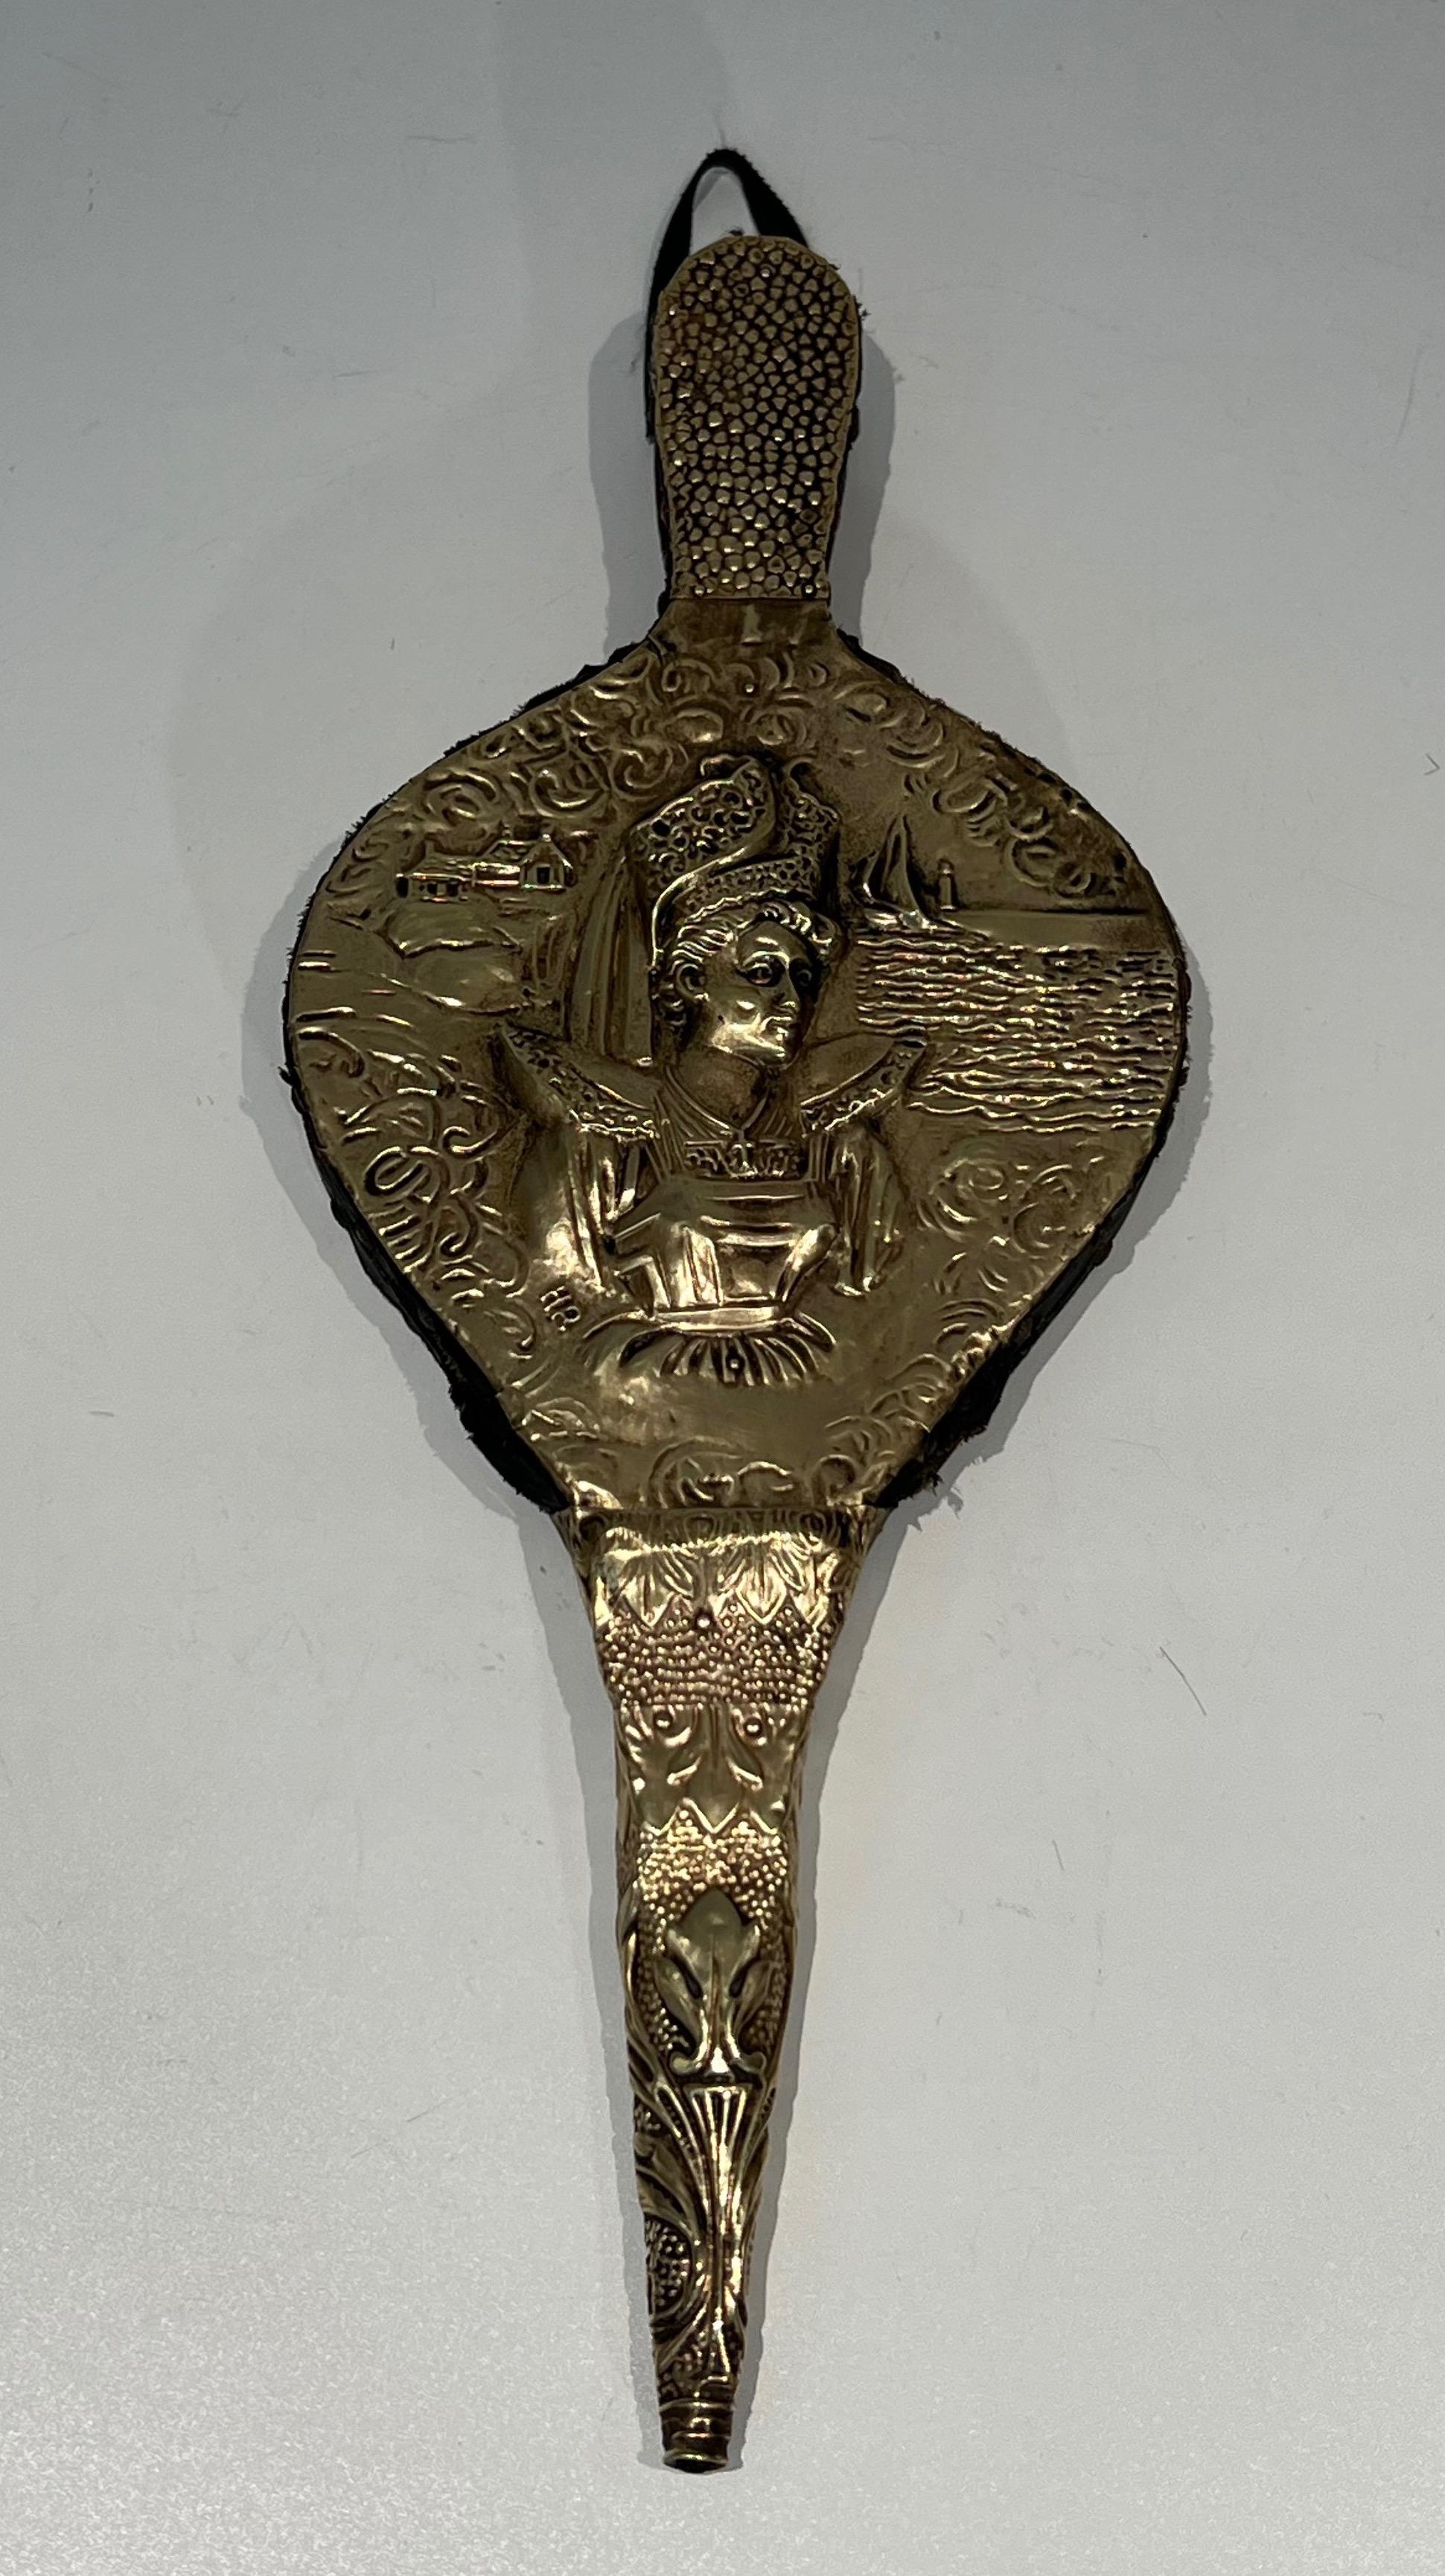 This rare fireplace bellows is made of embossed brass on wood; The embossed brass represents a woman. This is a French work in Louis the 16th style. Circa 1900